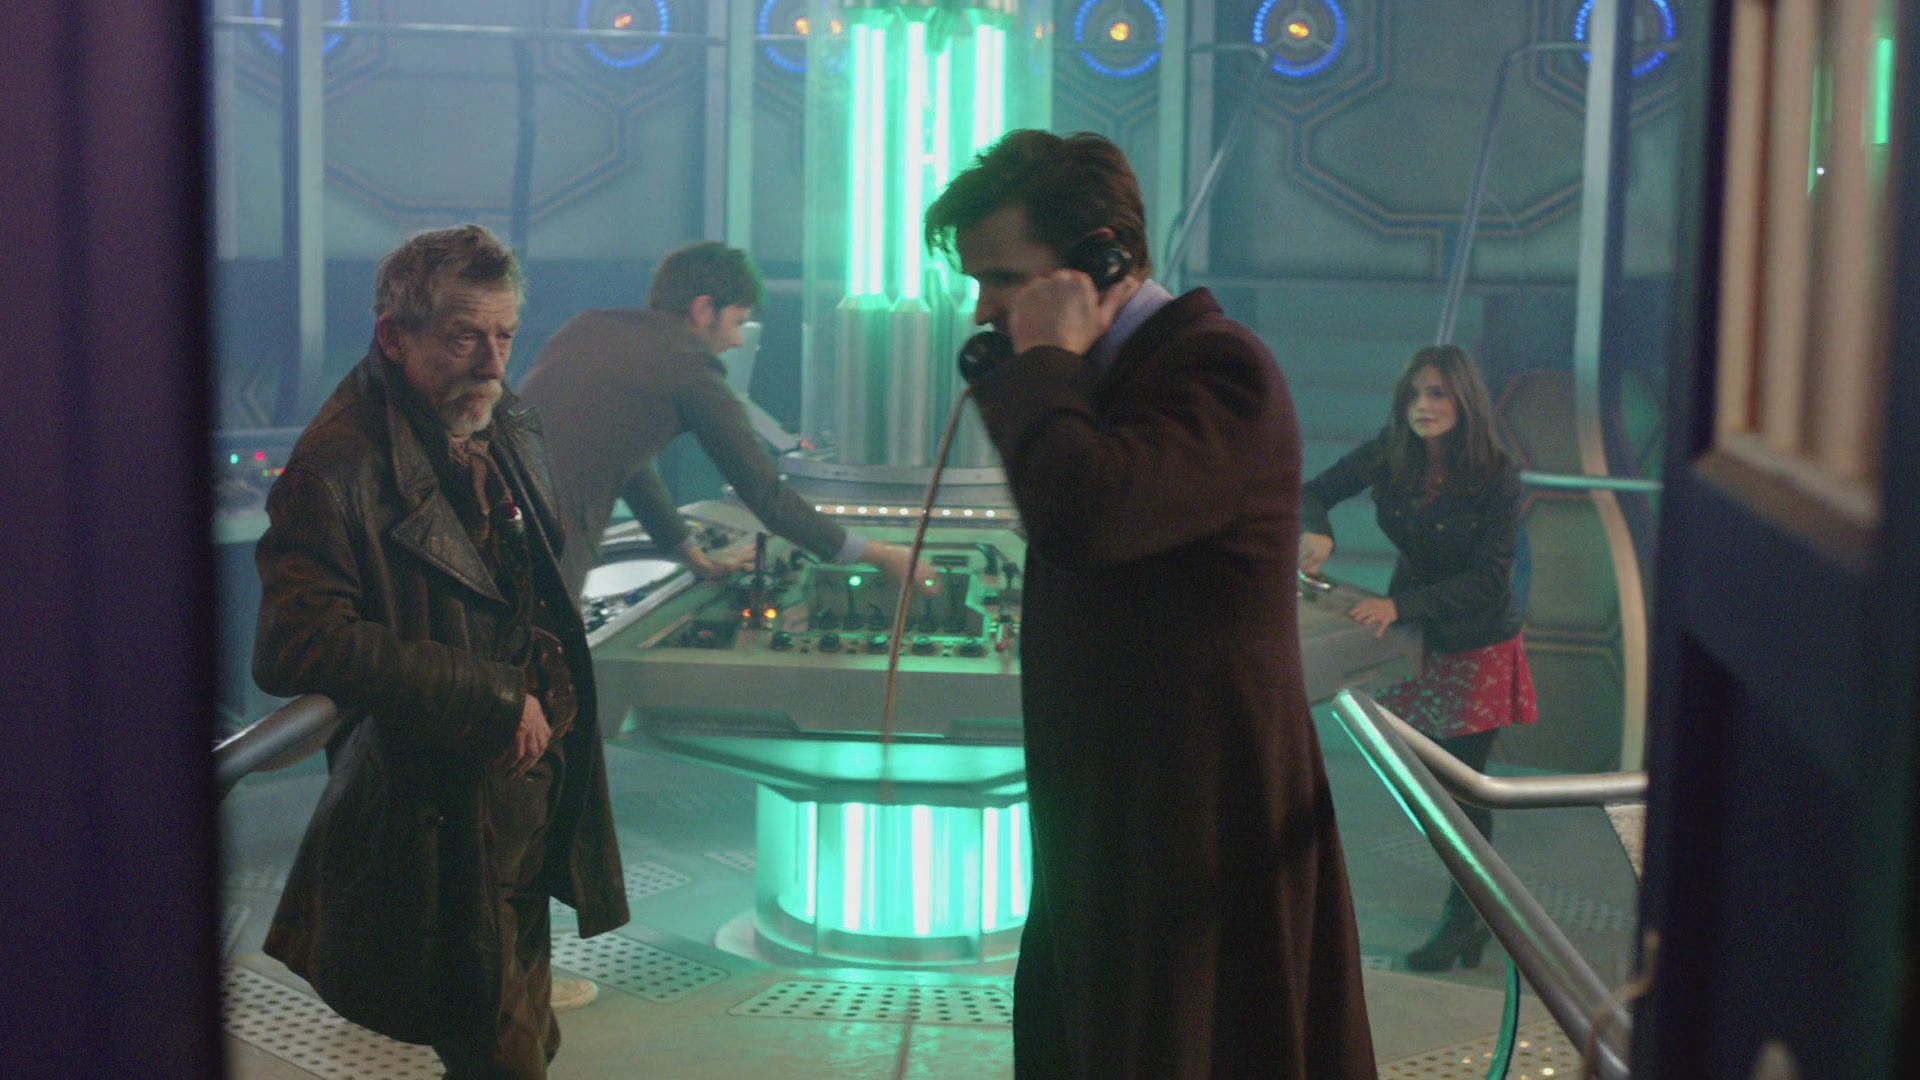 DayOfTheDoctor-Caps-0946.jpg